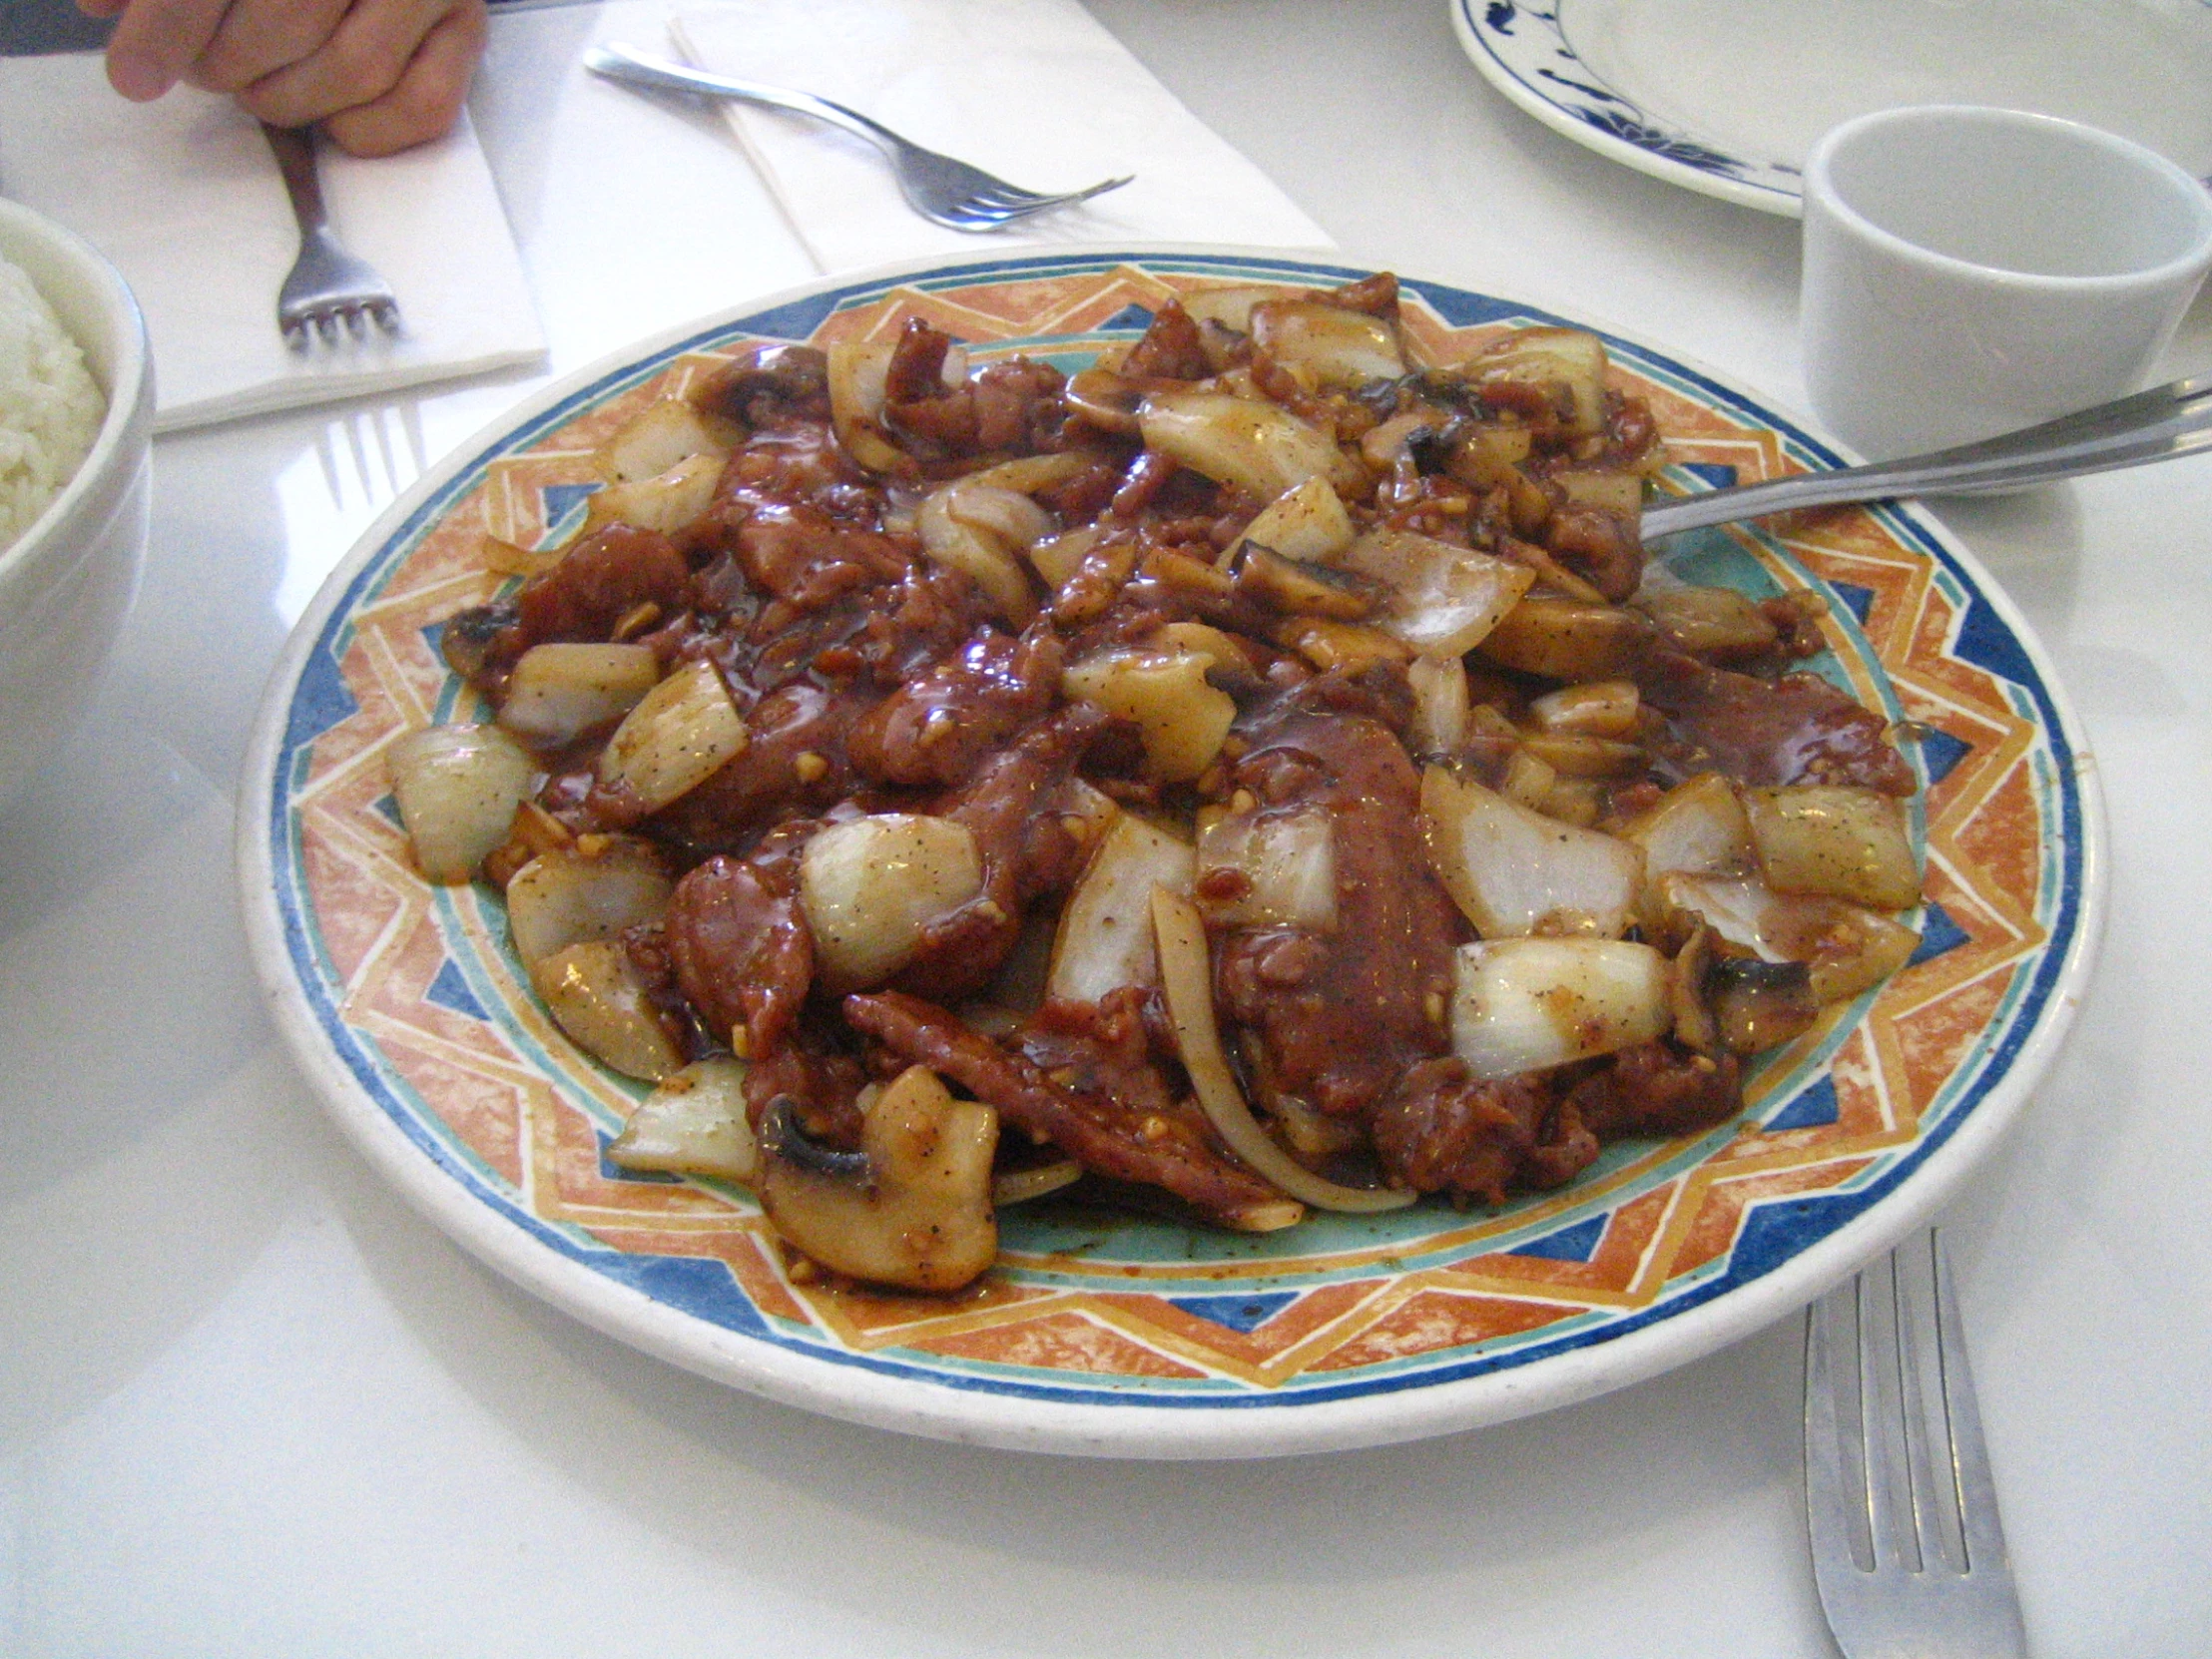 an image of a plate of food with meat